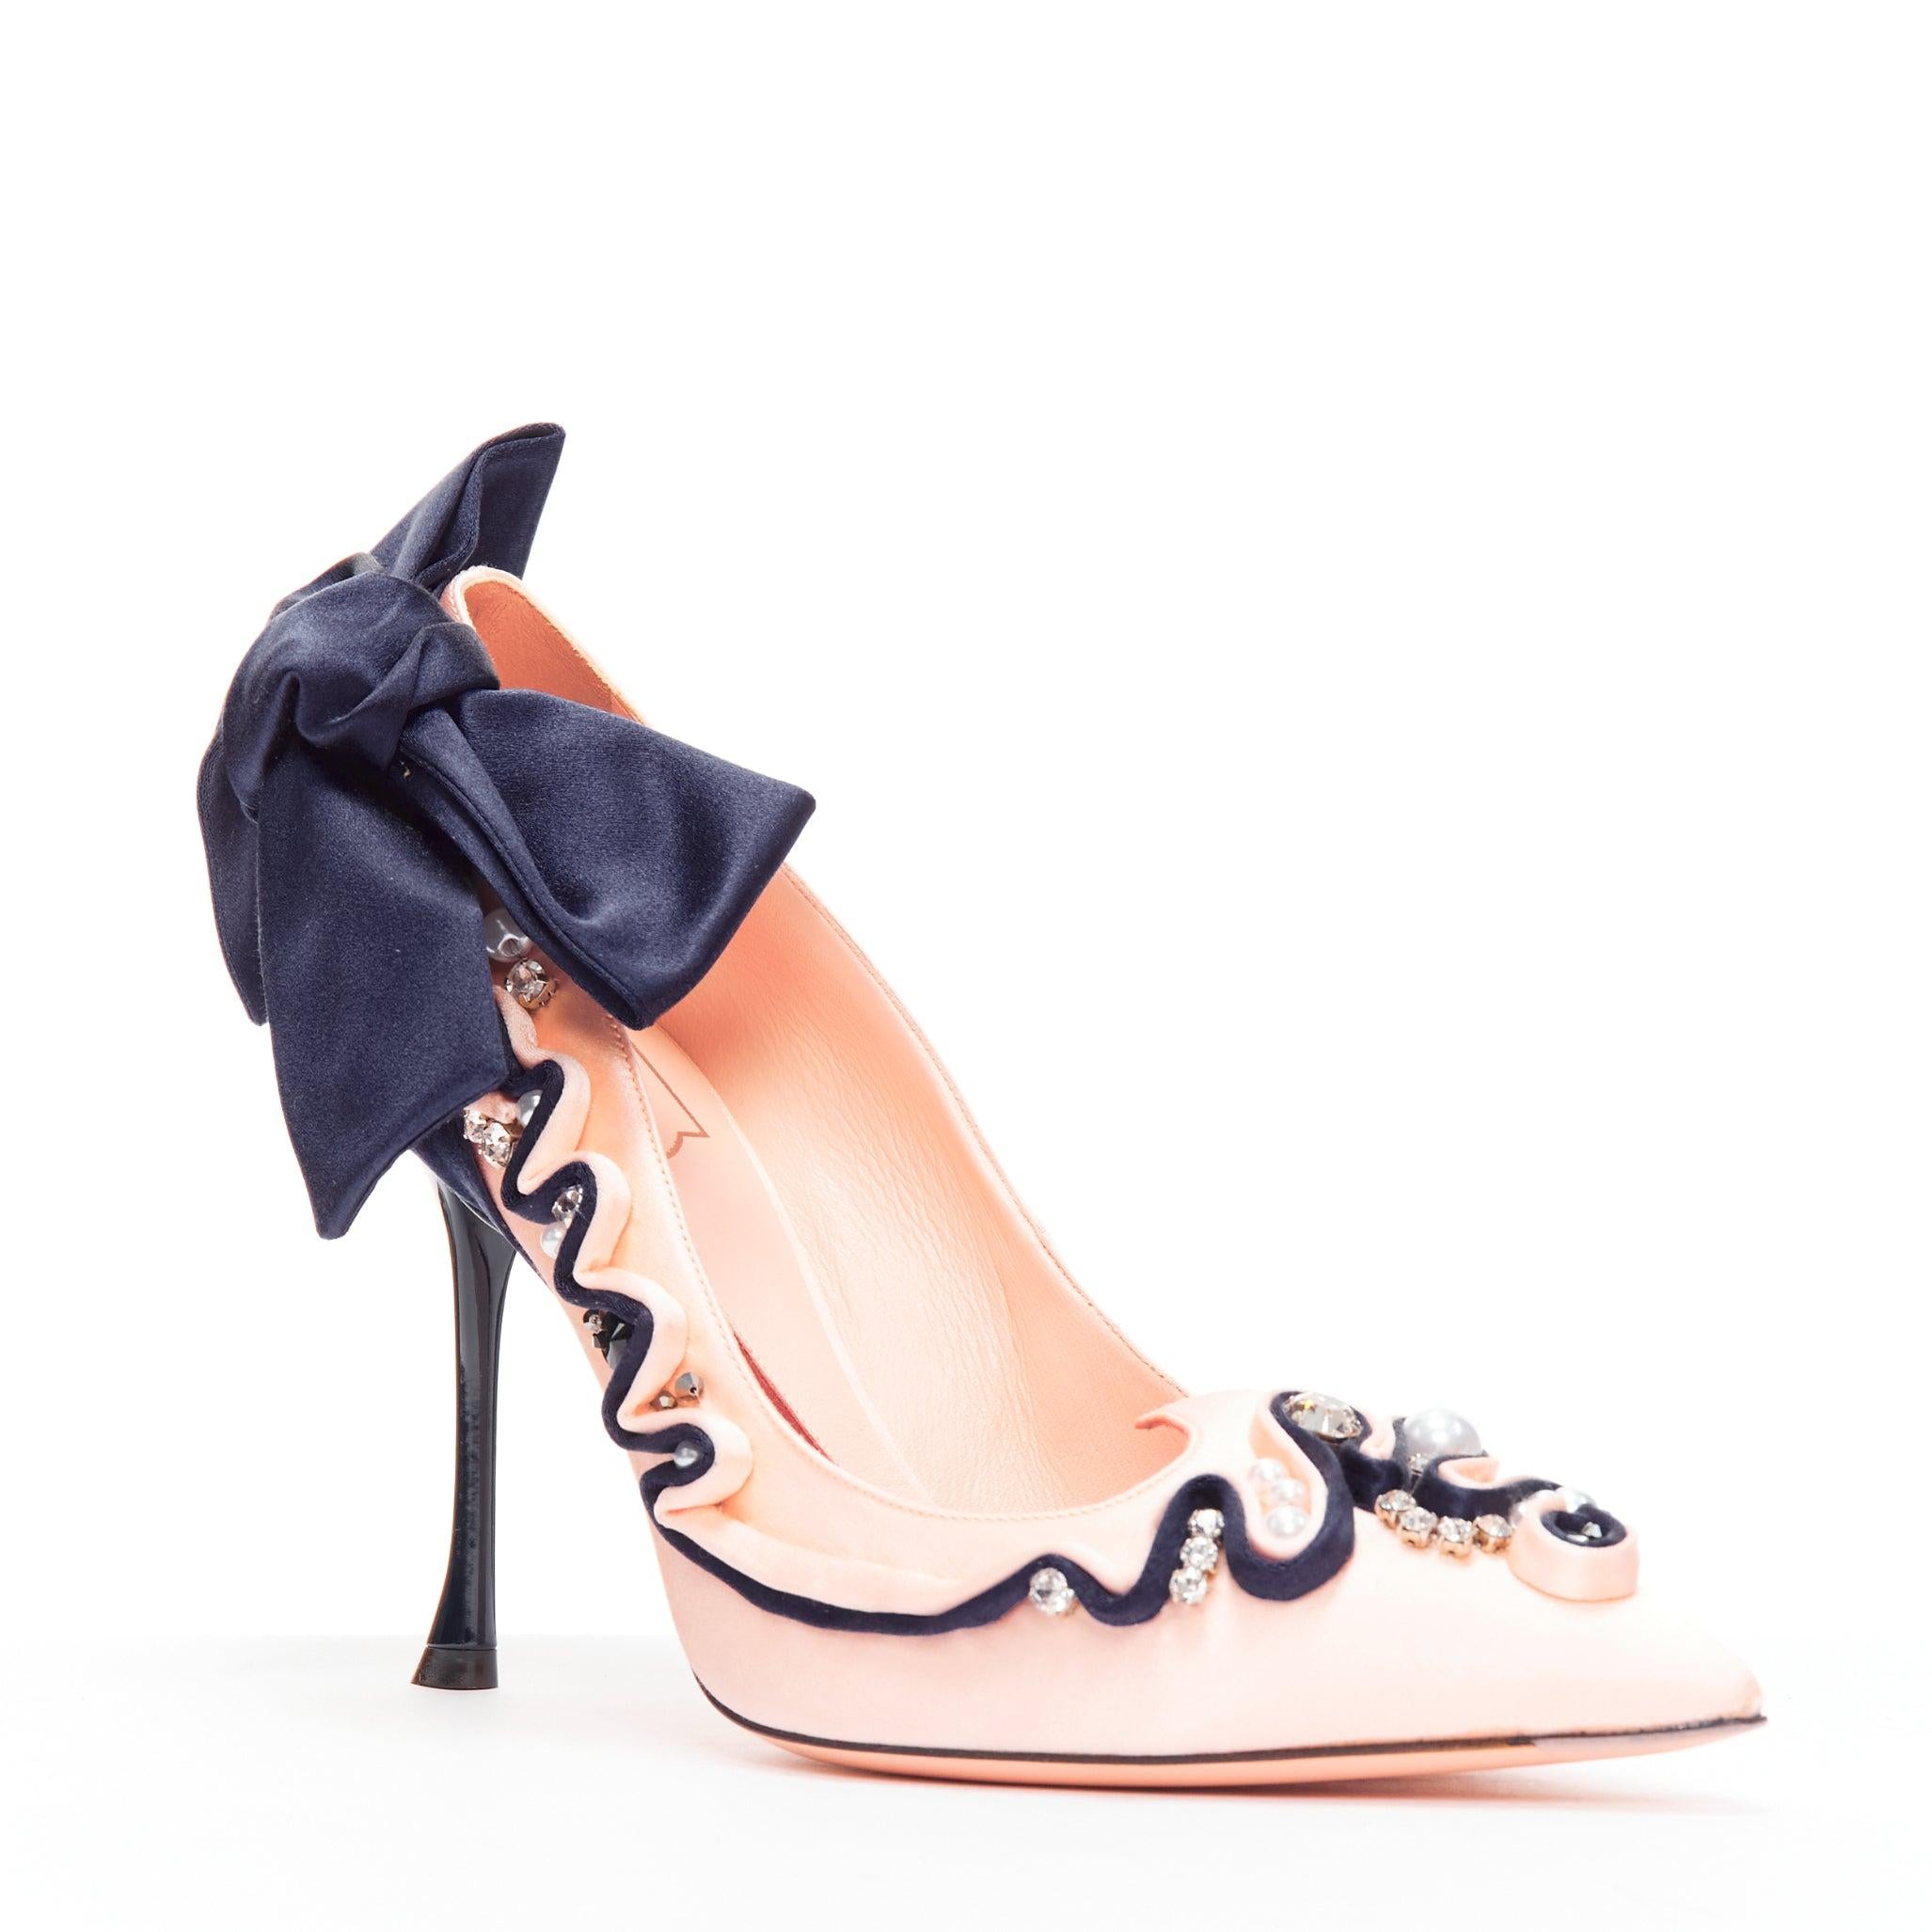 ROGER VIVIER Viv Couture pink navy pearl crystal ribbon heel pump EU40
Reference: TGAS/D00956
Brand: Roger Vivier
Model: Viv Couture
Material: Silk
Color: Pink, Navy
Pattern: Solid
Closure: Slip On
Extra Details: Pink satin pump. Faux pearl and